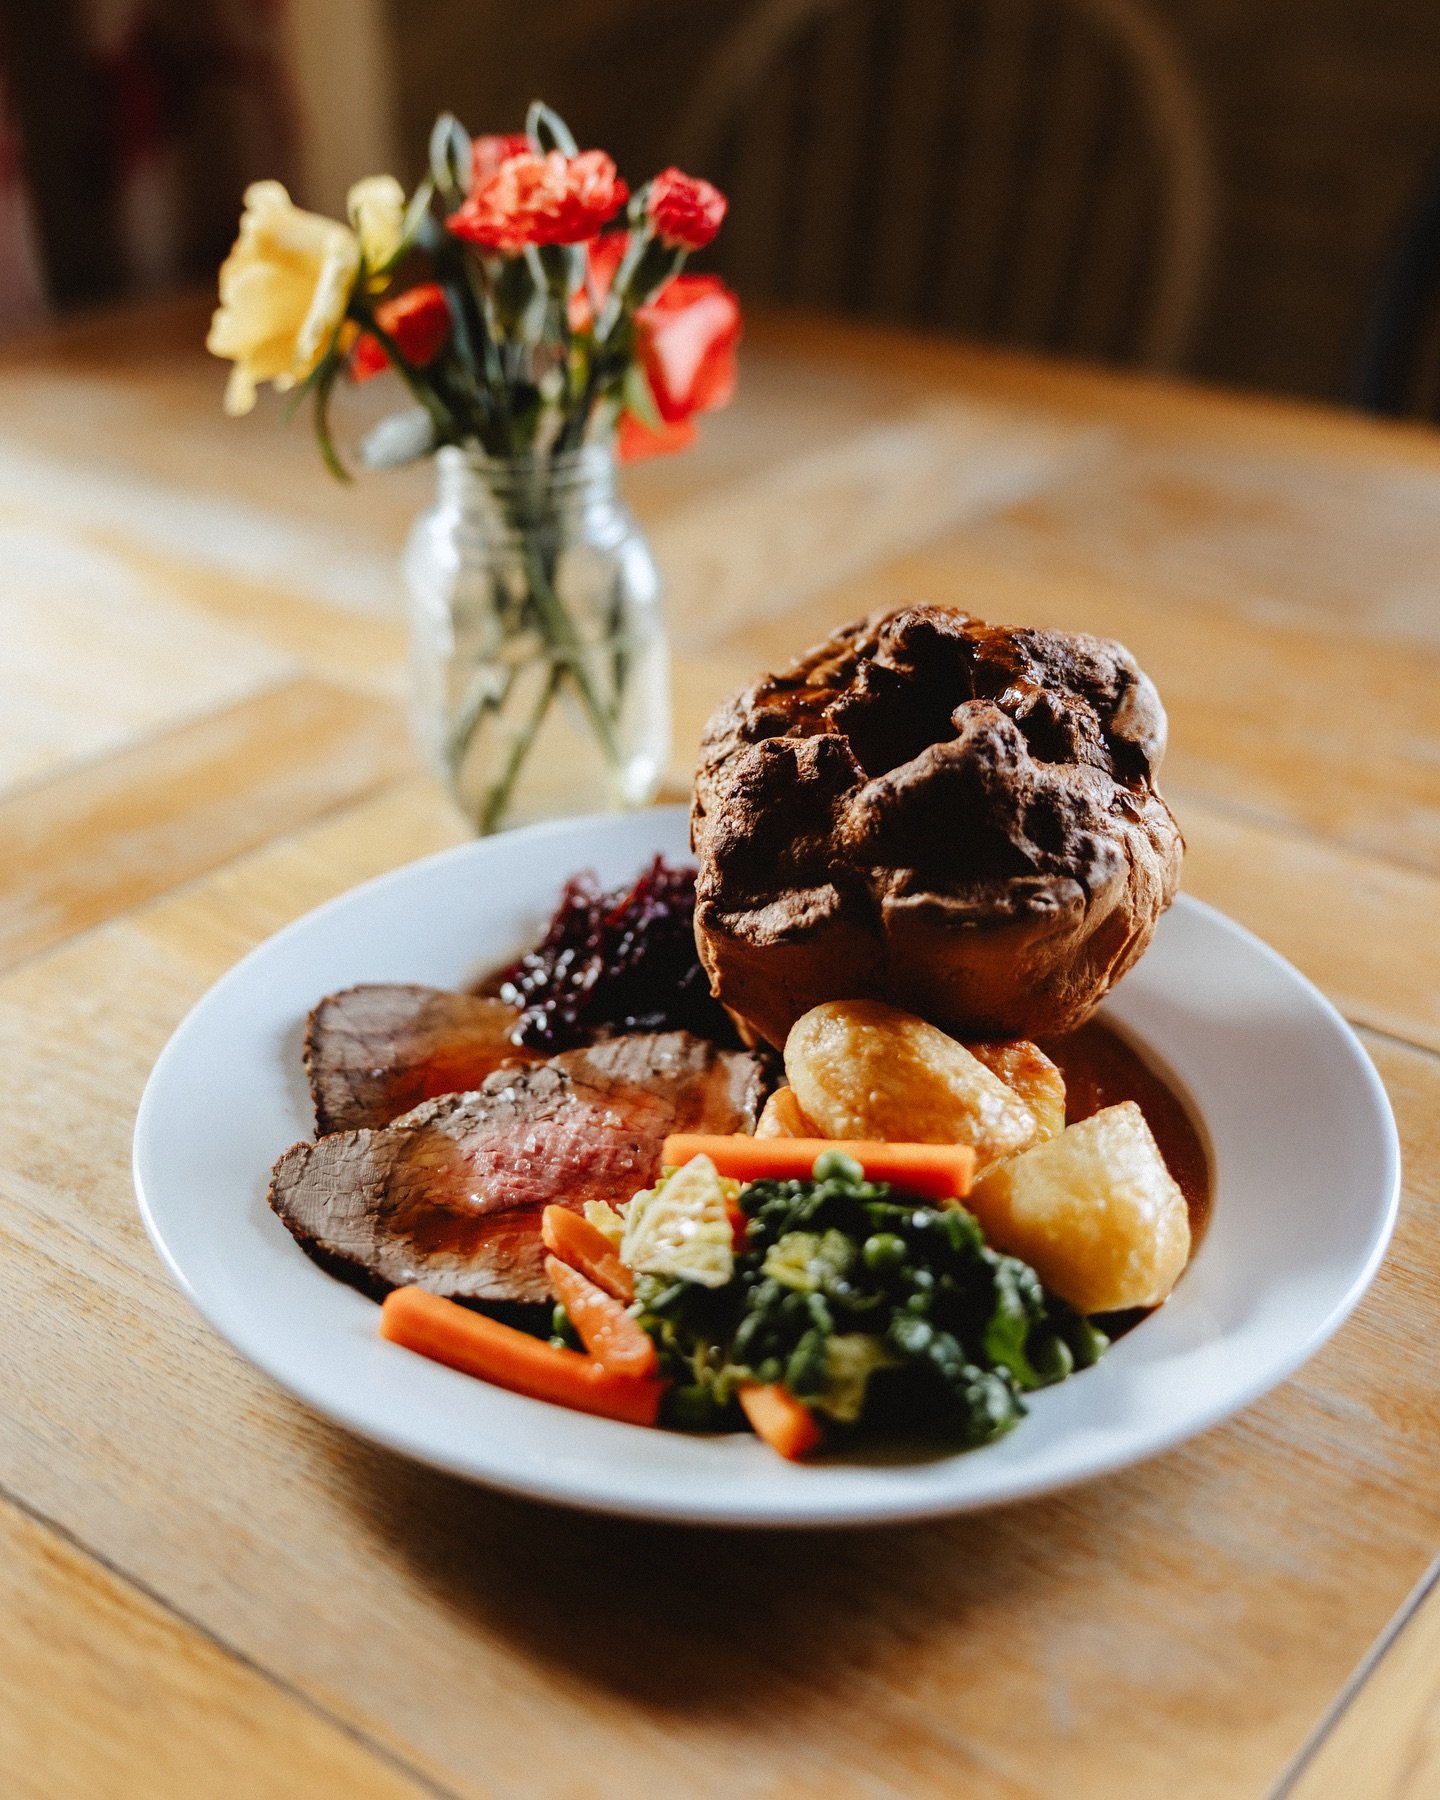 Book your table for Sunday lunch this weekend at the @powisarms 🍽️ 

#powisarms #publunch #pubs #britishpubs #britishpubfood #shropshirefood #shropshire #shropshirefoodies #sundaylunch